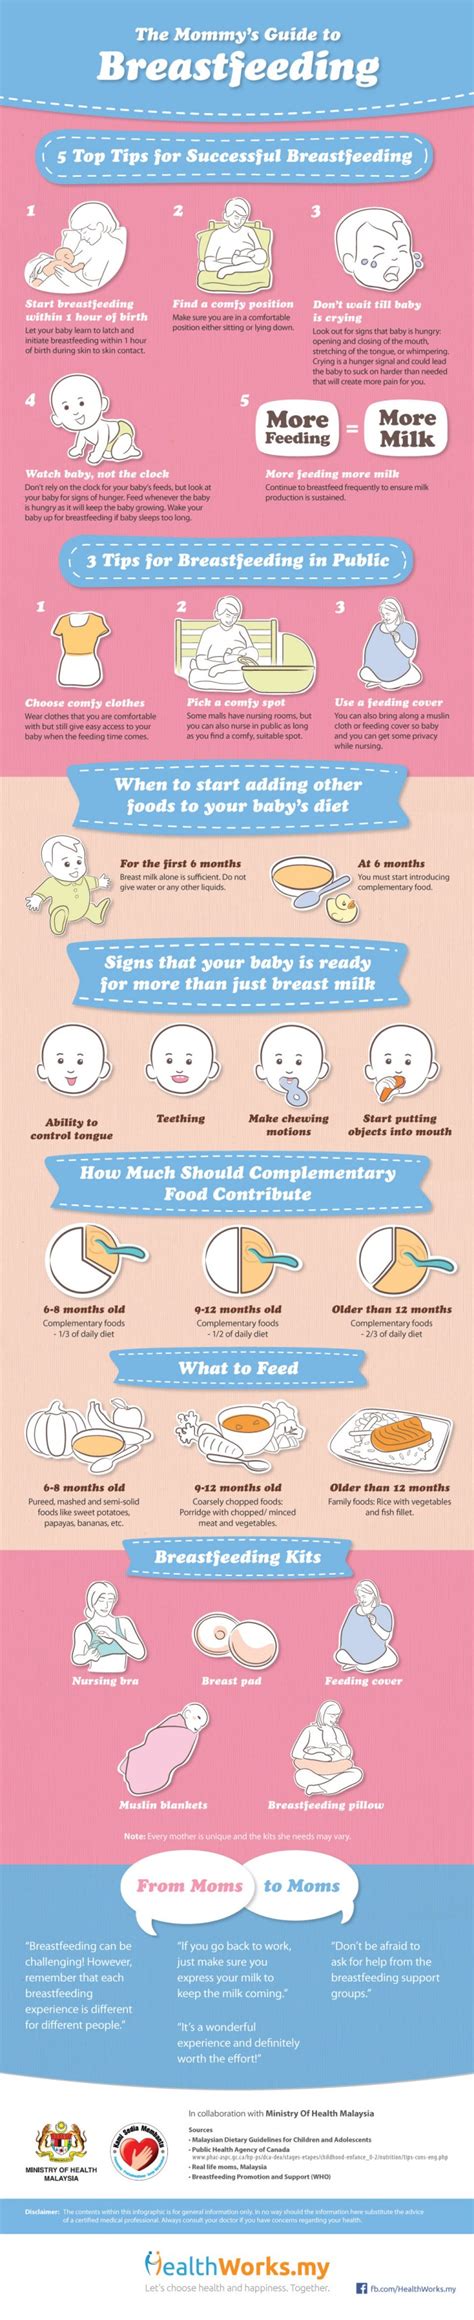 [infographic] the super mom s guide to breastfeeding